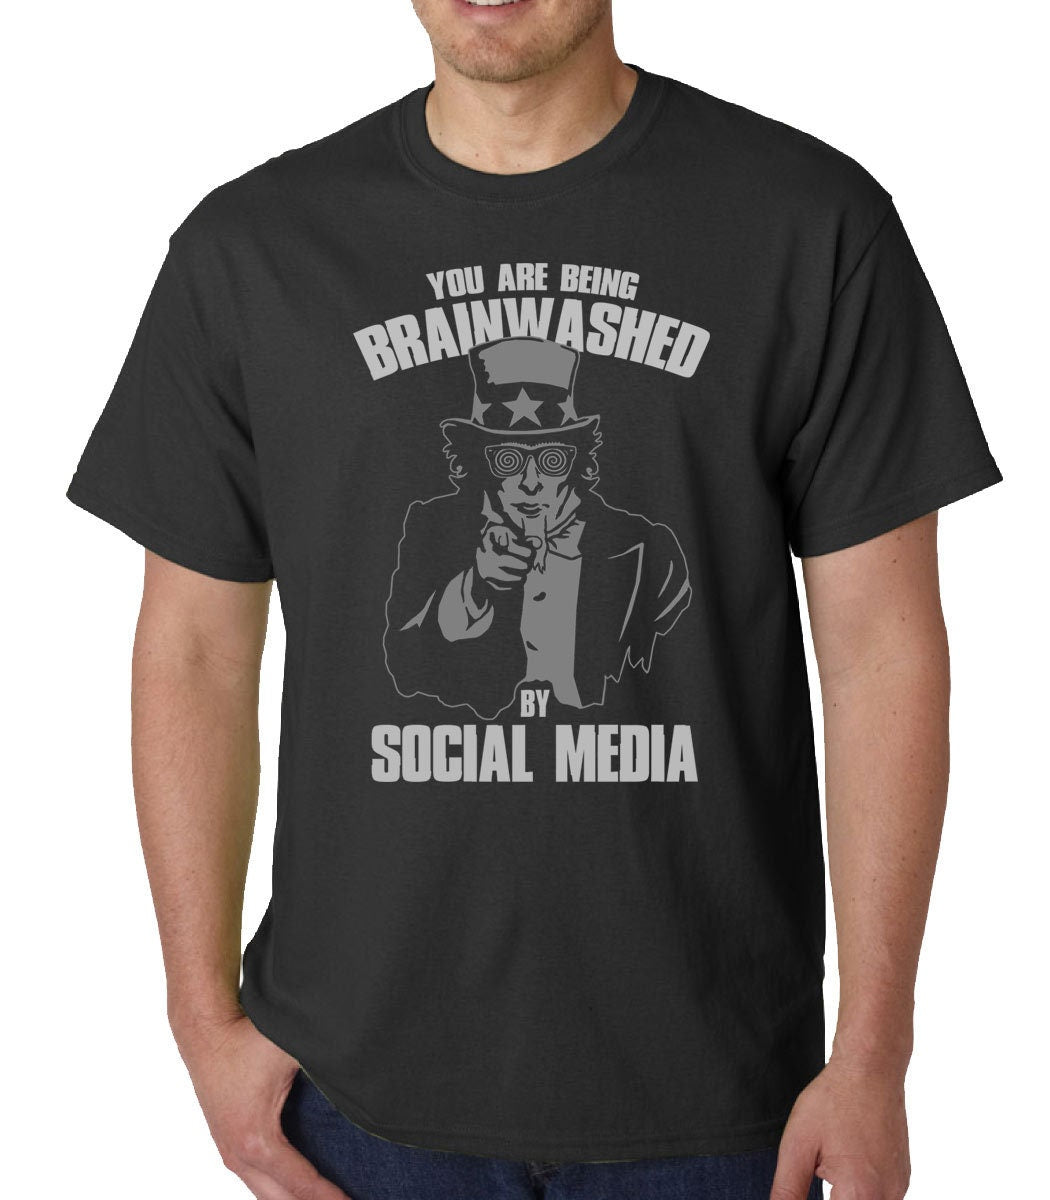 You Are Being Brainwashed by Social Media t-shirt